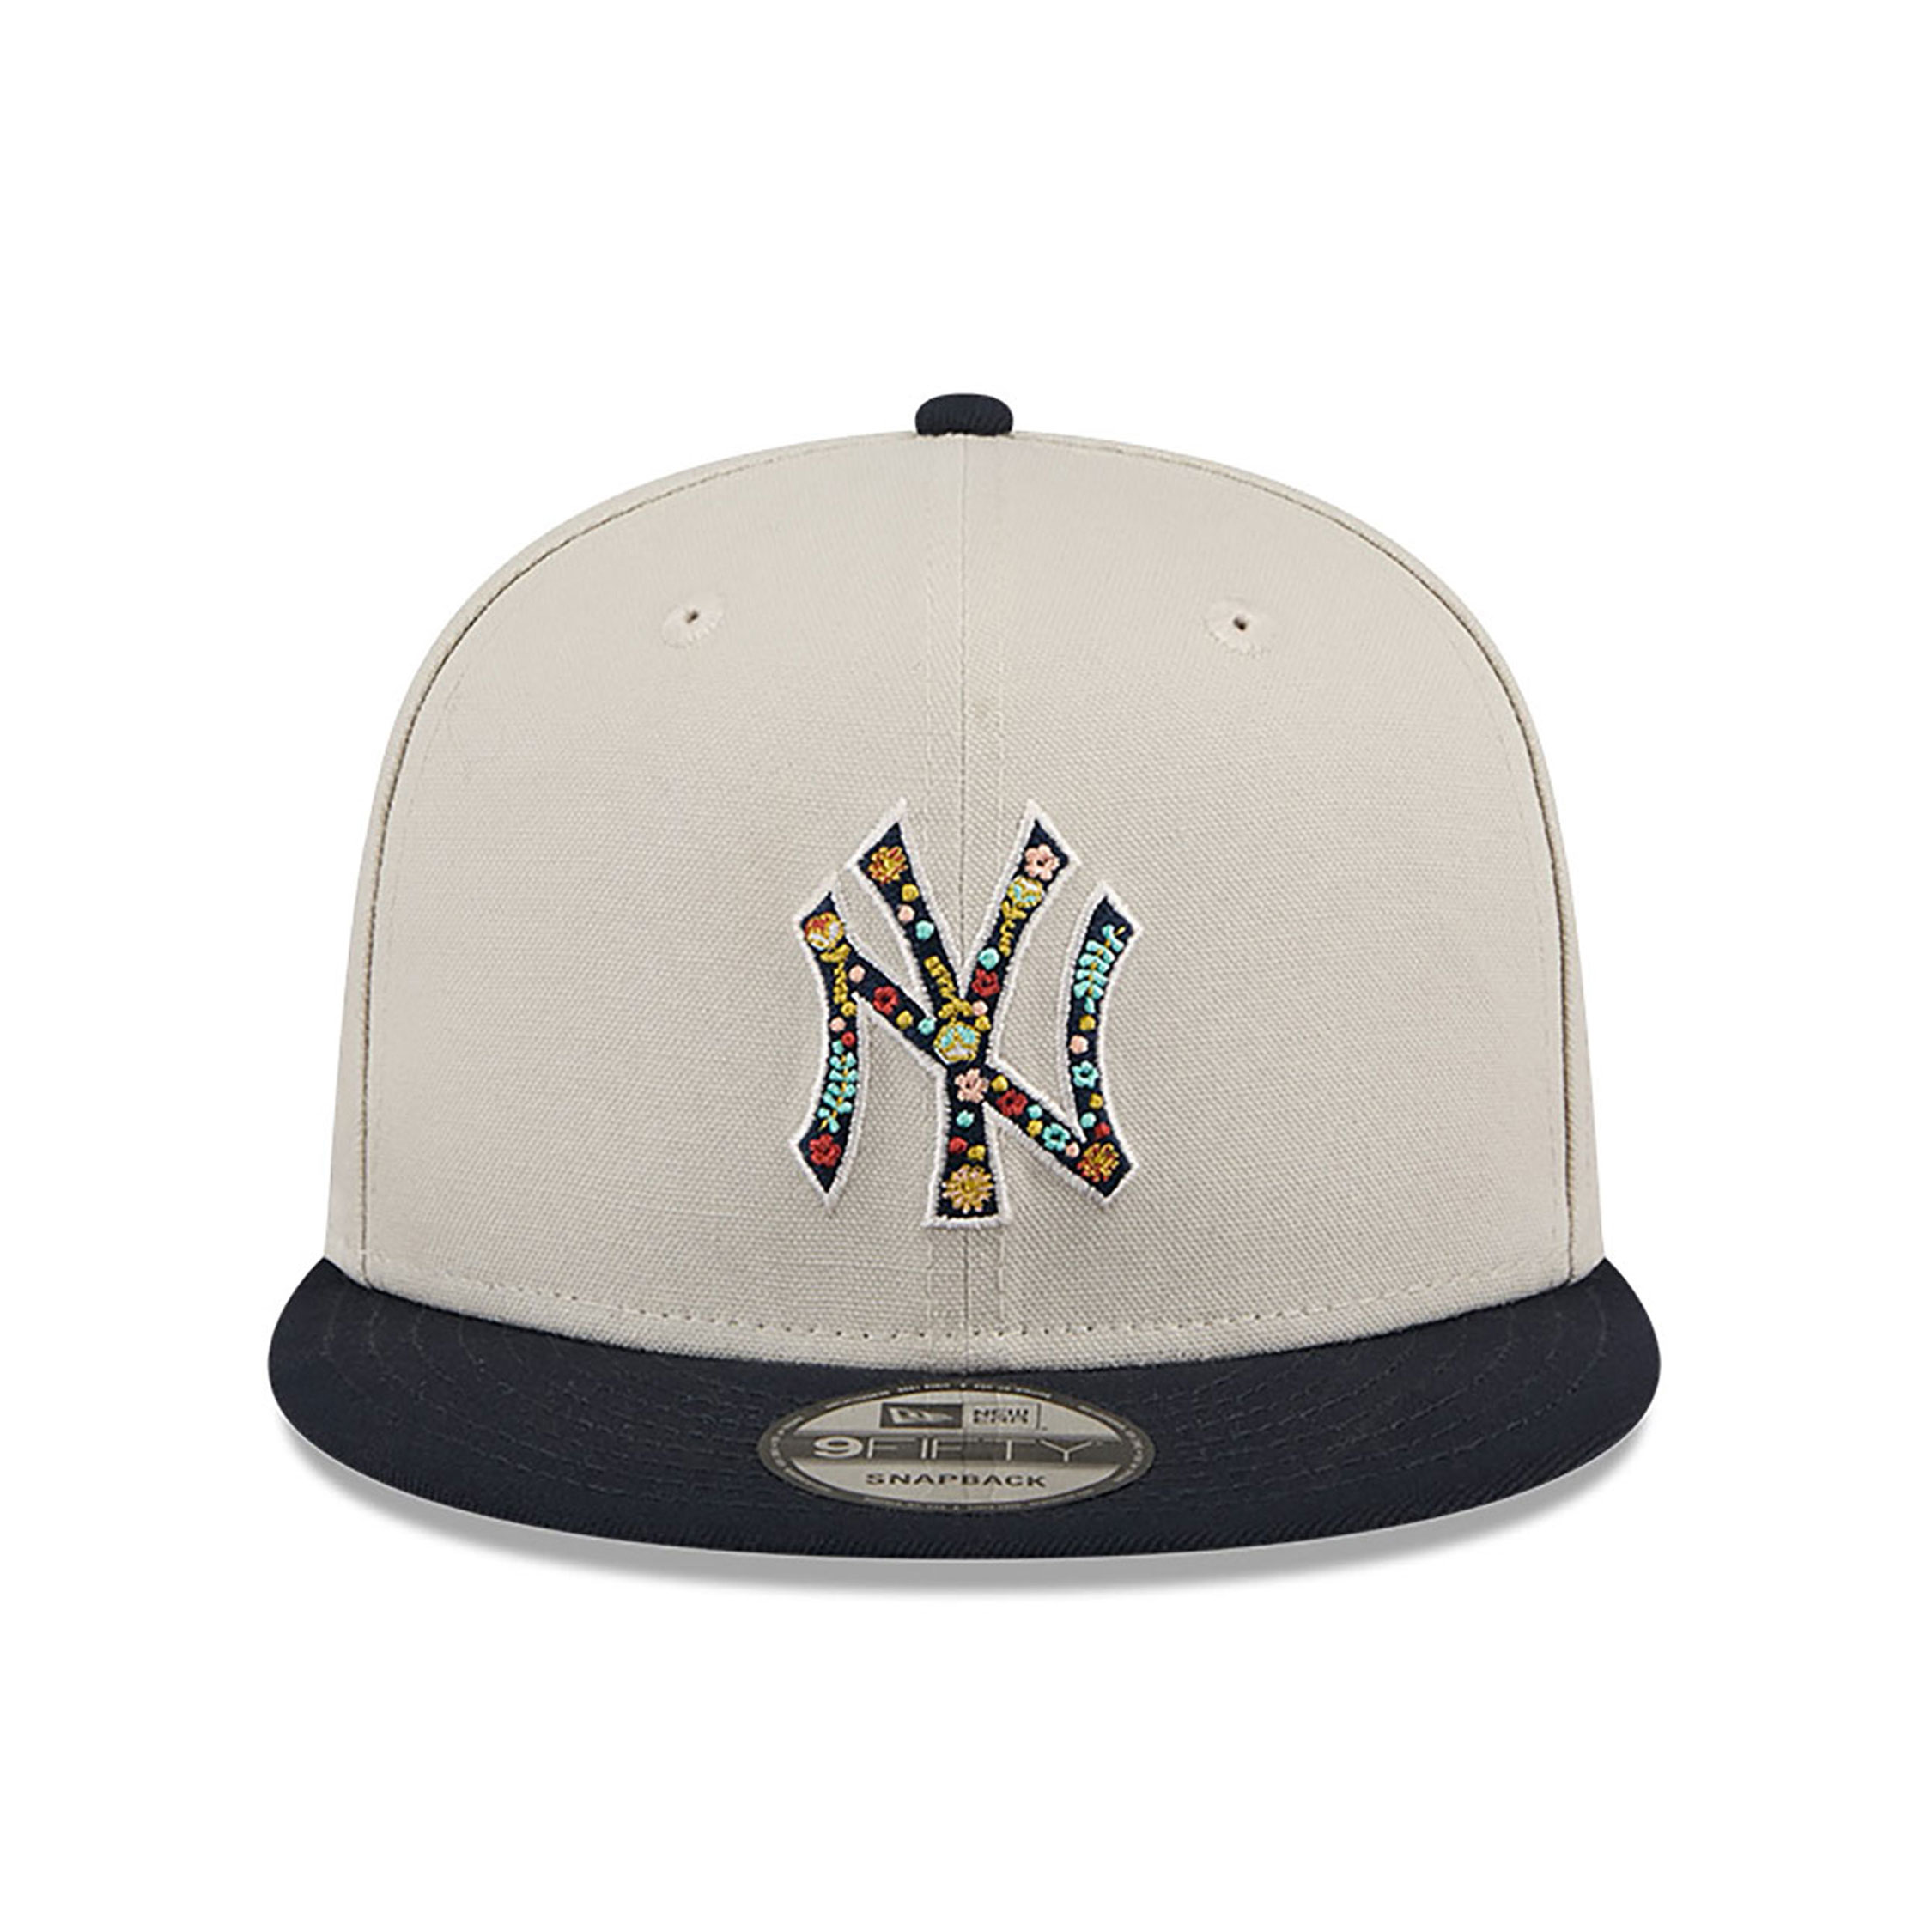 New York Yankees Floral Fill Light Beige 9FIFTY Snapback Cap